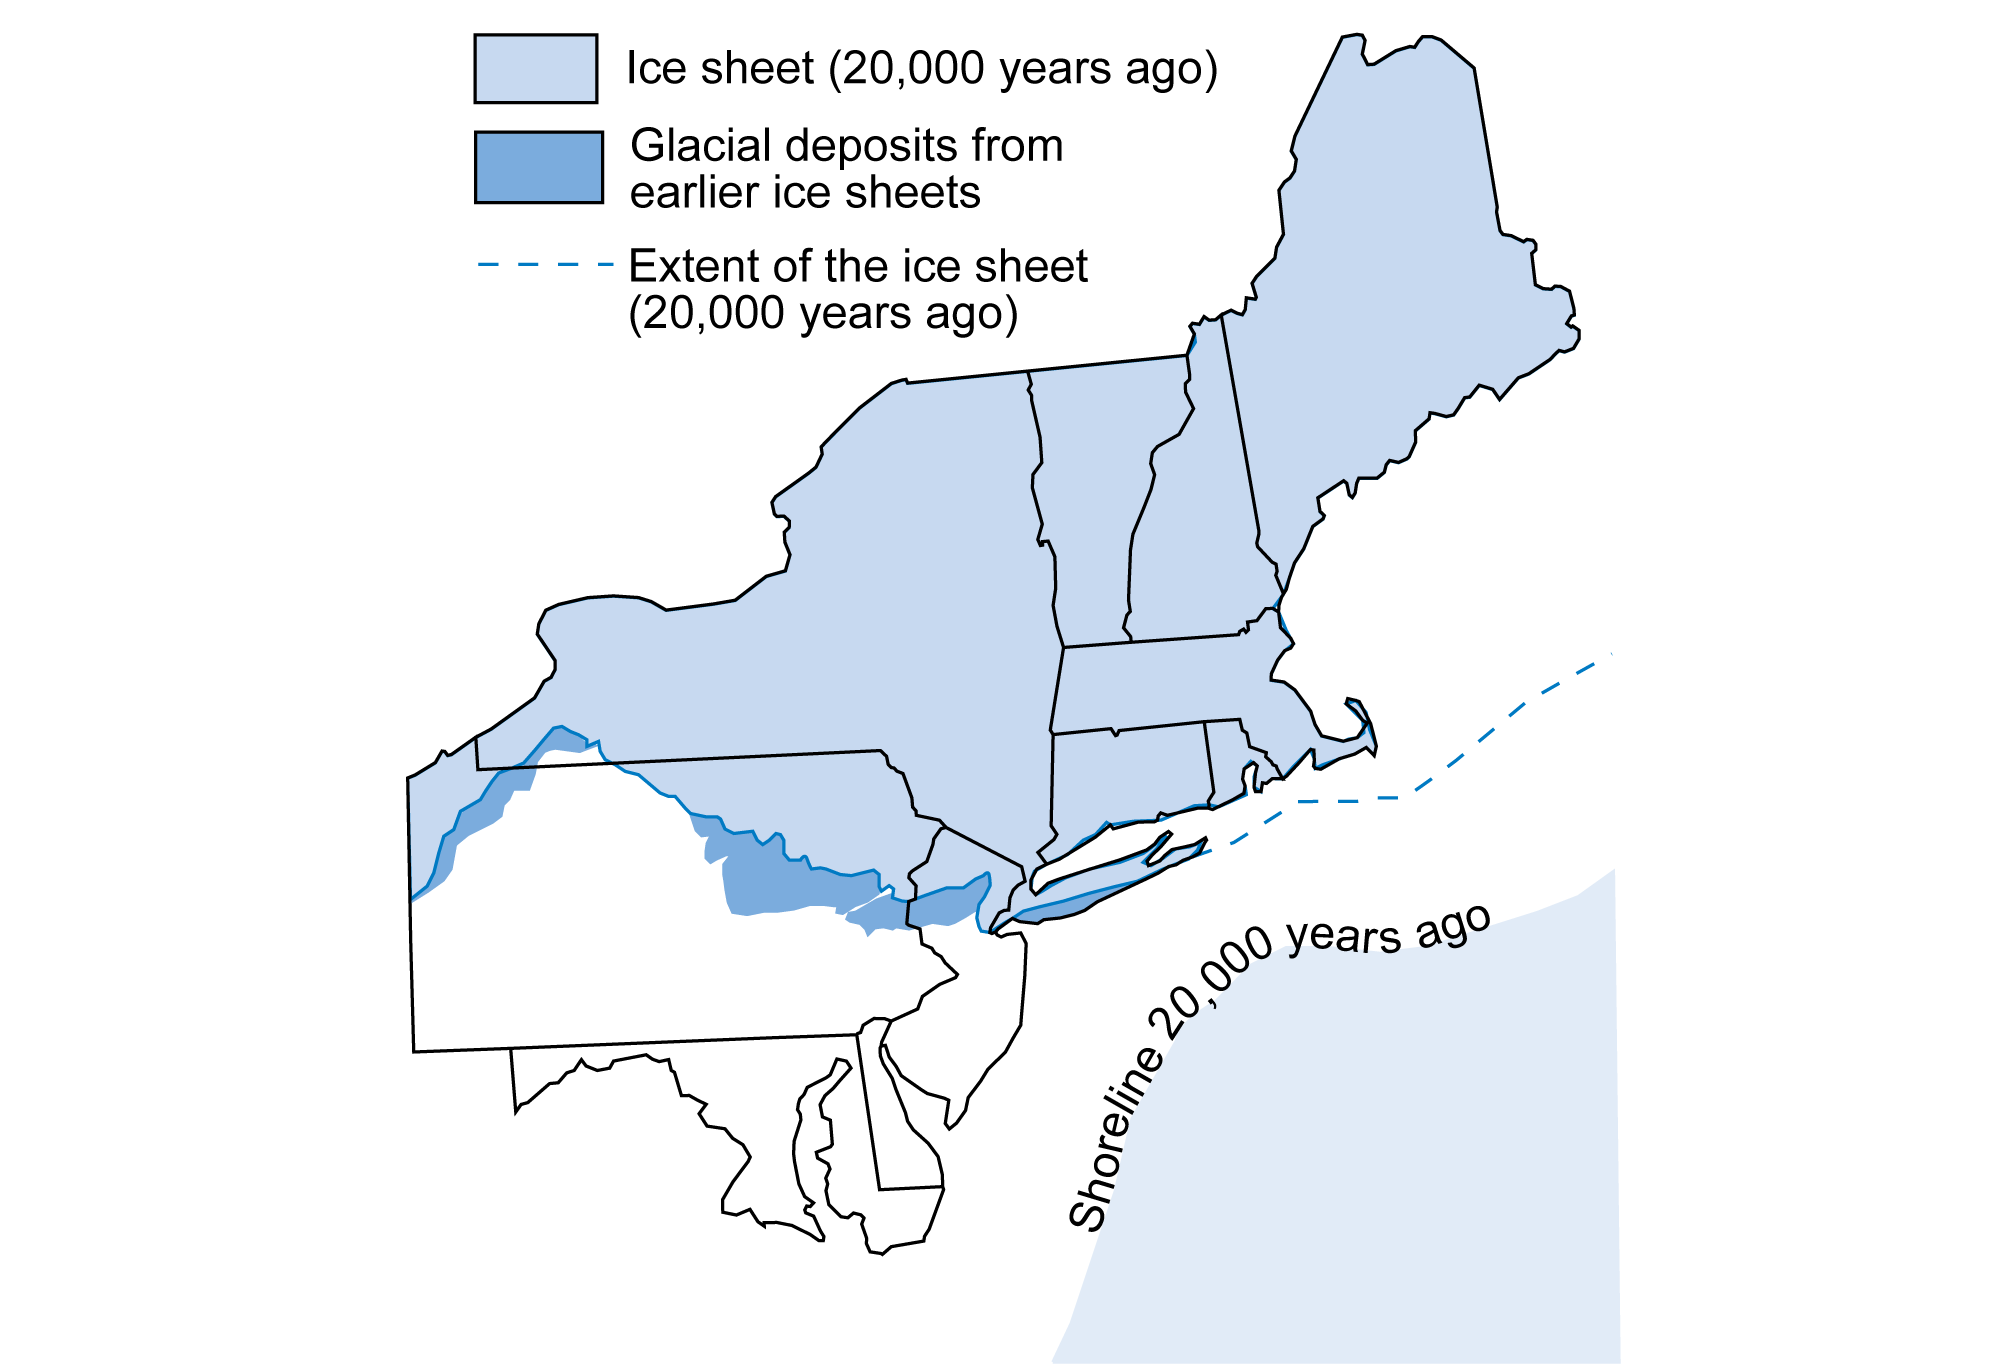 Map of the northeastern United States 20,000 years ago with state boundaries outlined in black. The continental ice sheet is shaded light blue on land, white offshore; its maximum extent is marked by a blue line. The sheet reached as far south as northern Pennsylvania, northern New Jersey, Long Island. Older glacial deposits are shaded medium blue. These occur in northwestern Pennsylvania, southwestern New York, northeastern Pennsylvania, northern New Jersey, and southern Long Island, just below the line of glacial advance at 20,000 years ago. The shoreline, which was lower than it is today, is also marked to the southeast of the modern-day states.